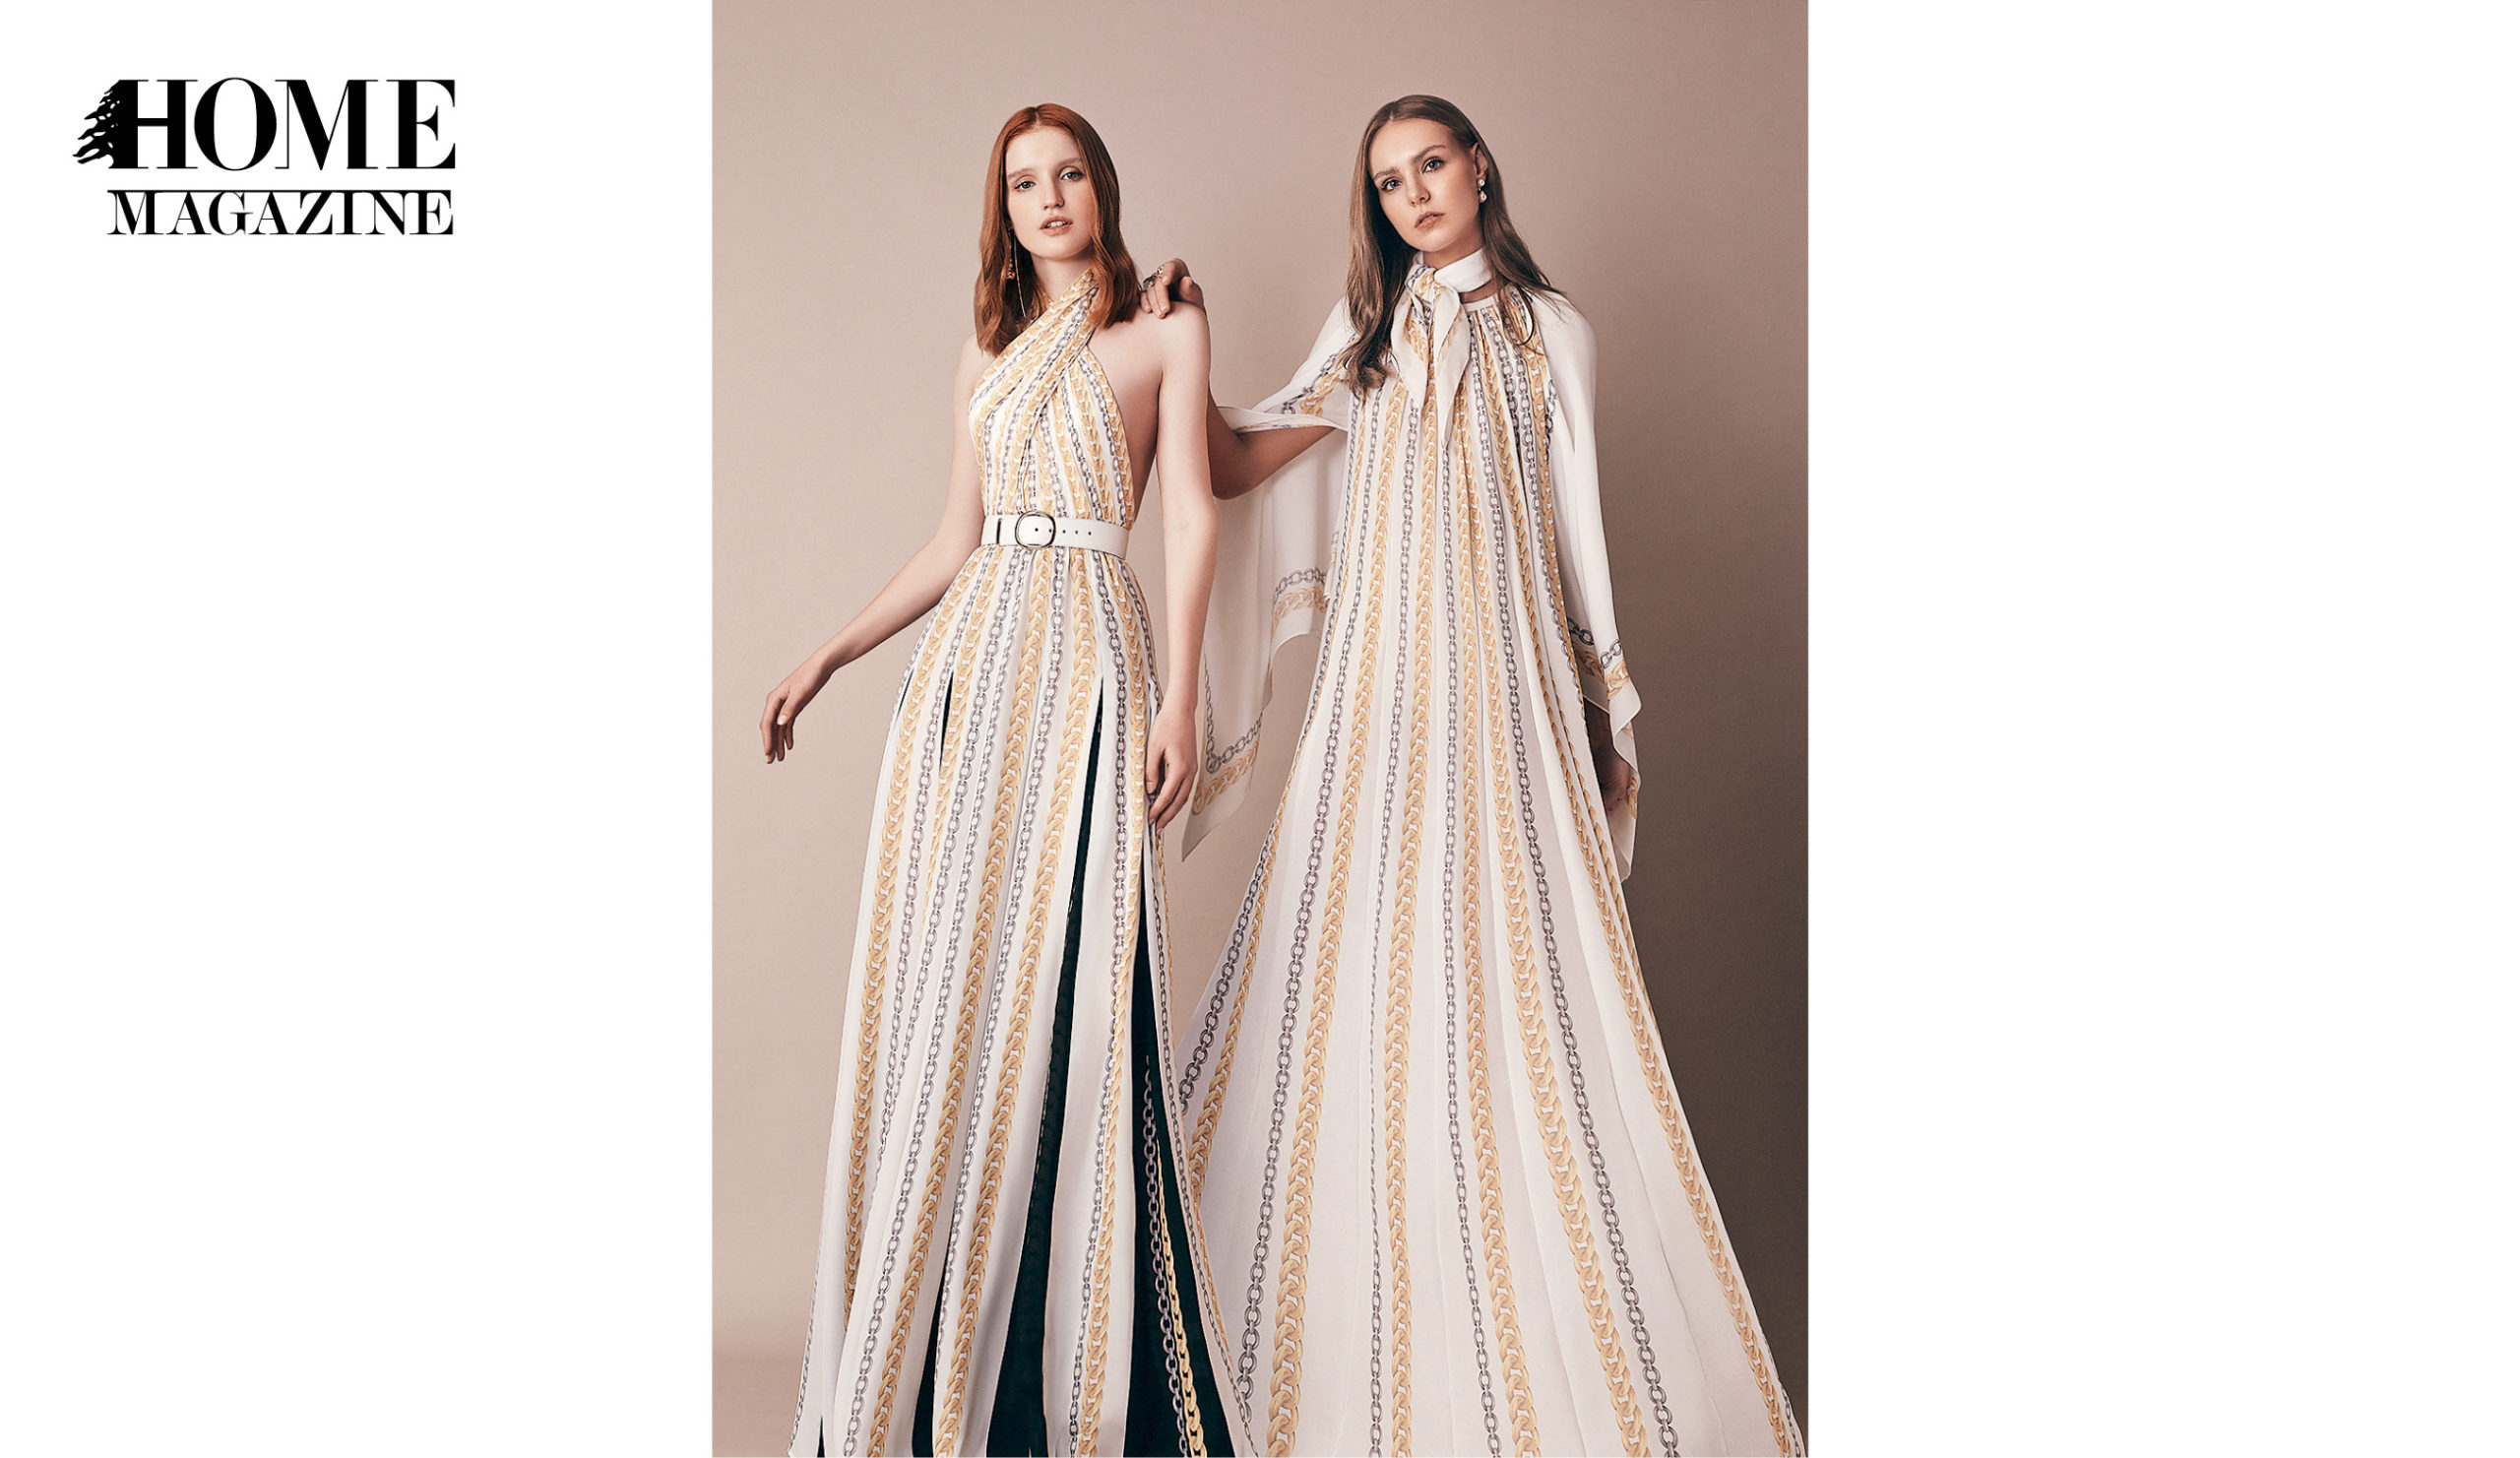 Two models wearing white striped dresses